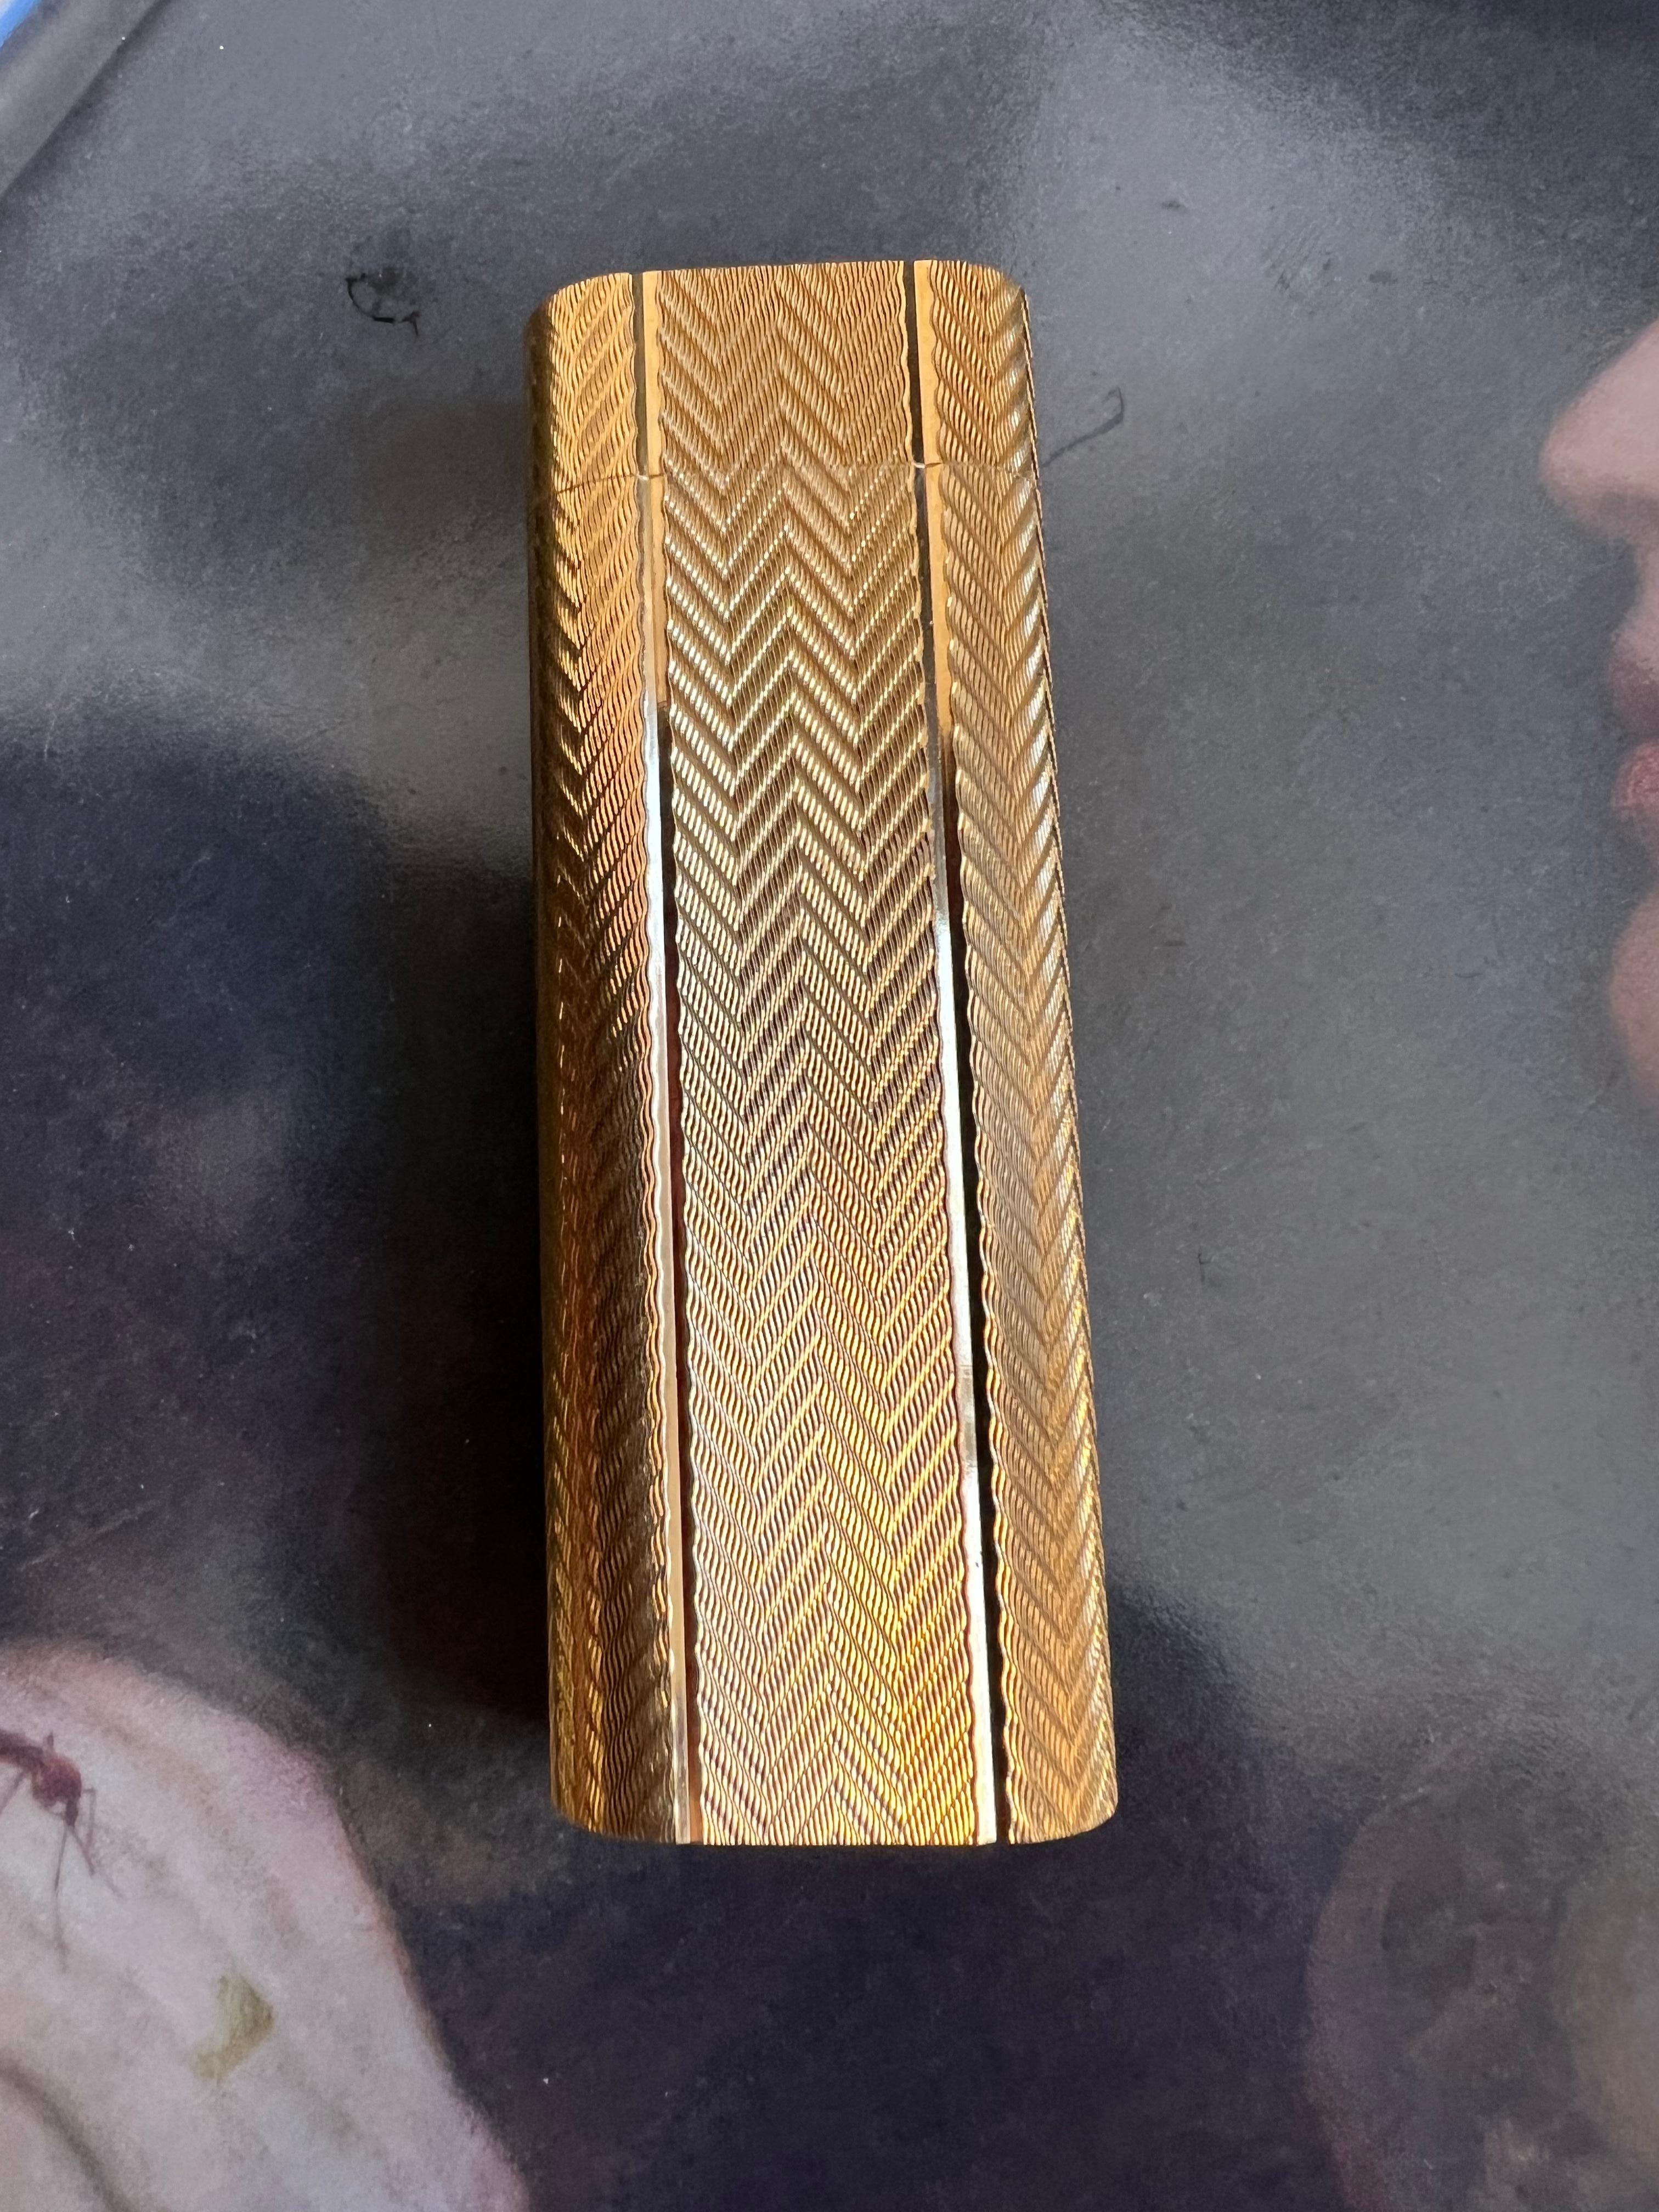 Vintage and Retro Cartier gold plated lighter 
Circa 1980s 
A Les Must De Cartier Paris 18k gold plated lighter
Retro, elegant and chic 
In mint working condition, sparks, ignites and flame. 
Comes with original Cartier box and certificate.
Perfect